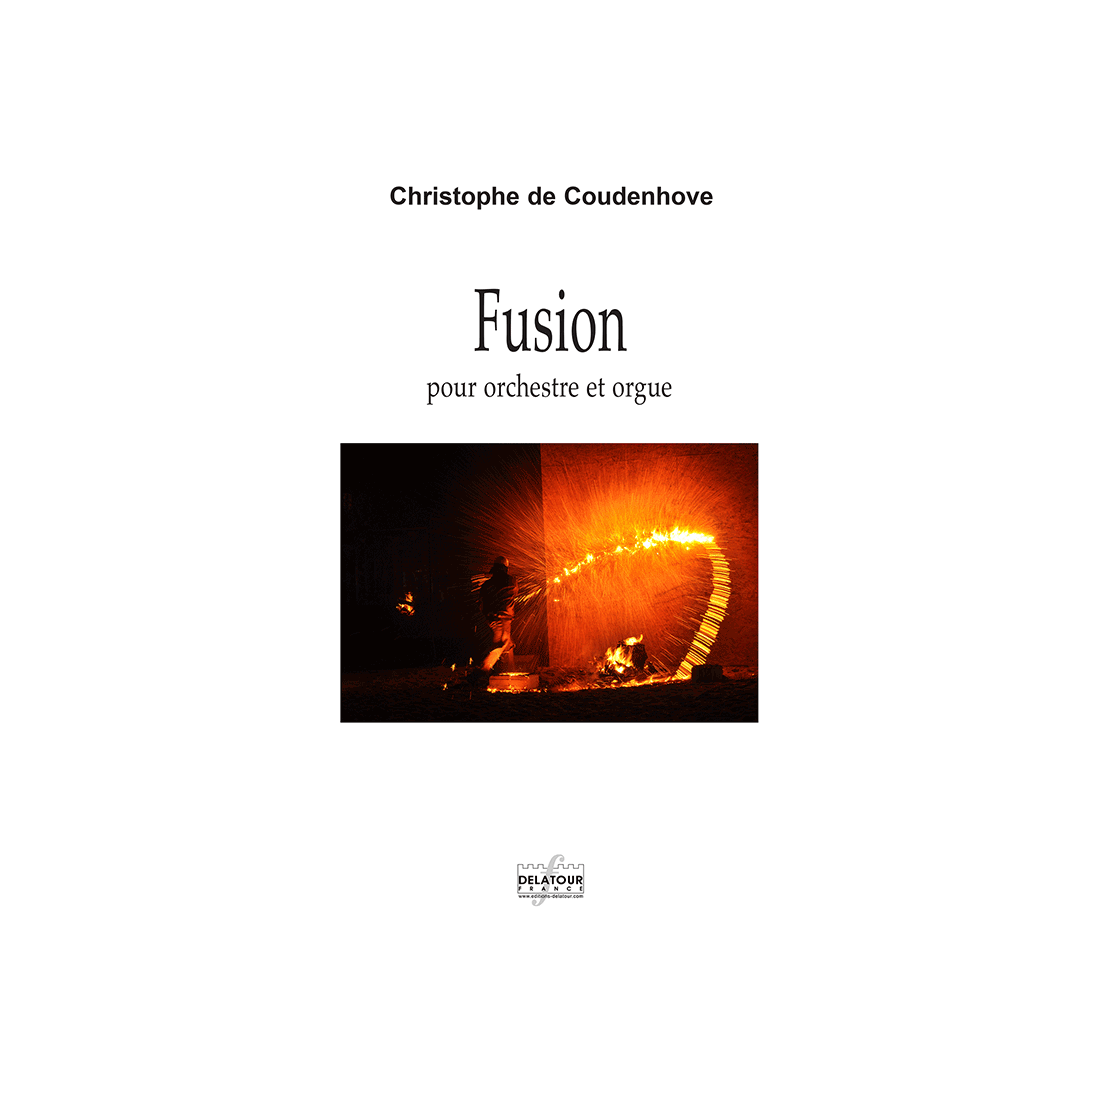 Fusion for orchestra and organ (PARTS ON HIRE)